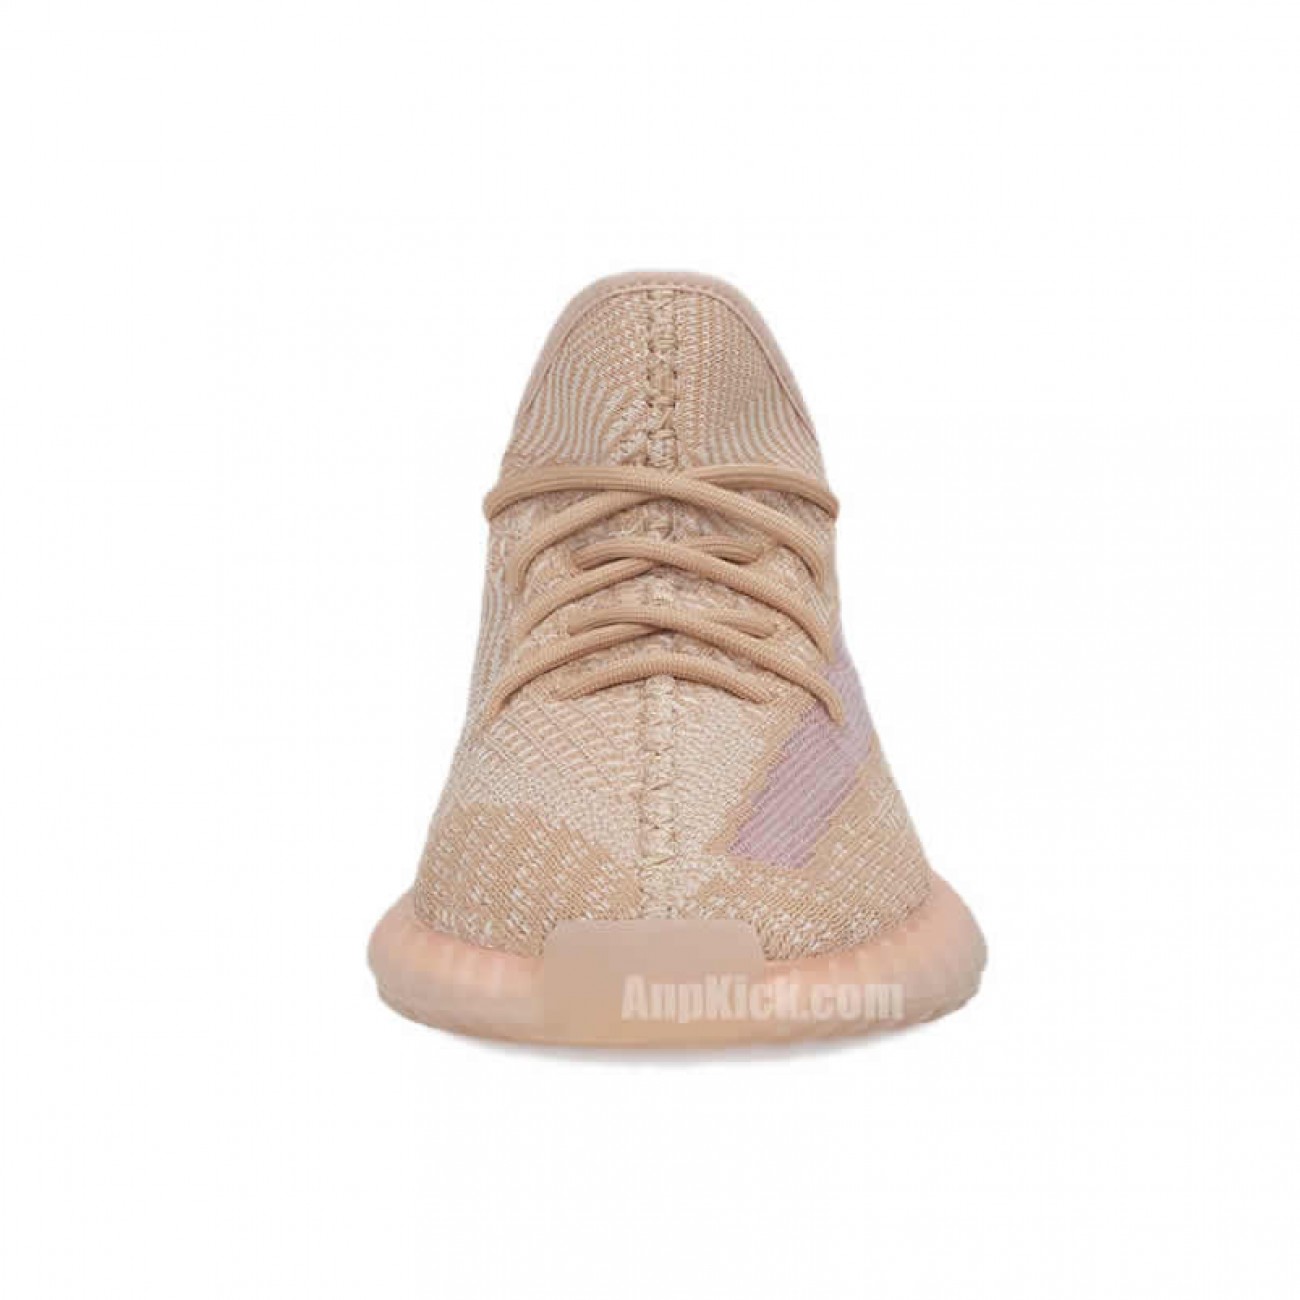 adidas Yeezy Boost 350 V2 "Clay" 2019 For Sale Release Date EG7490